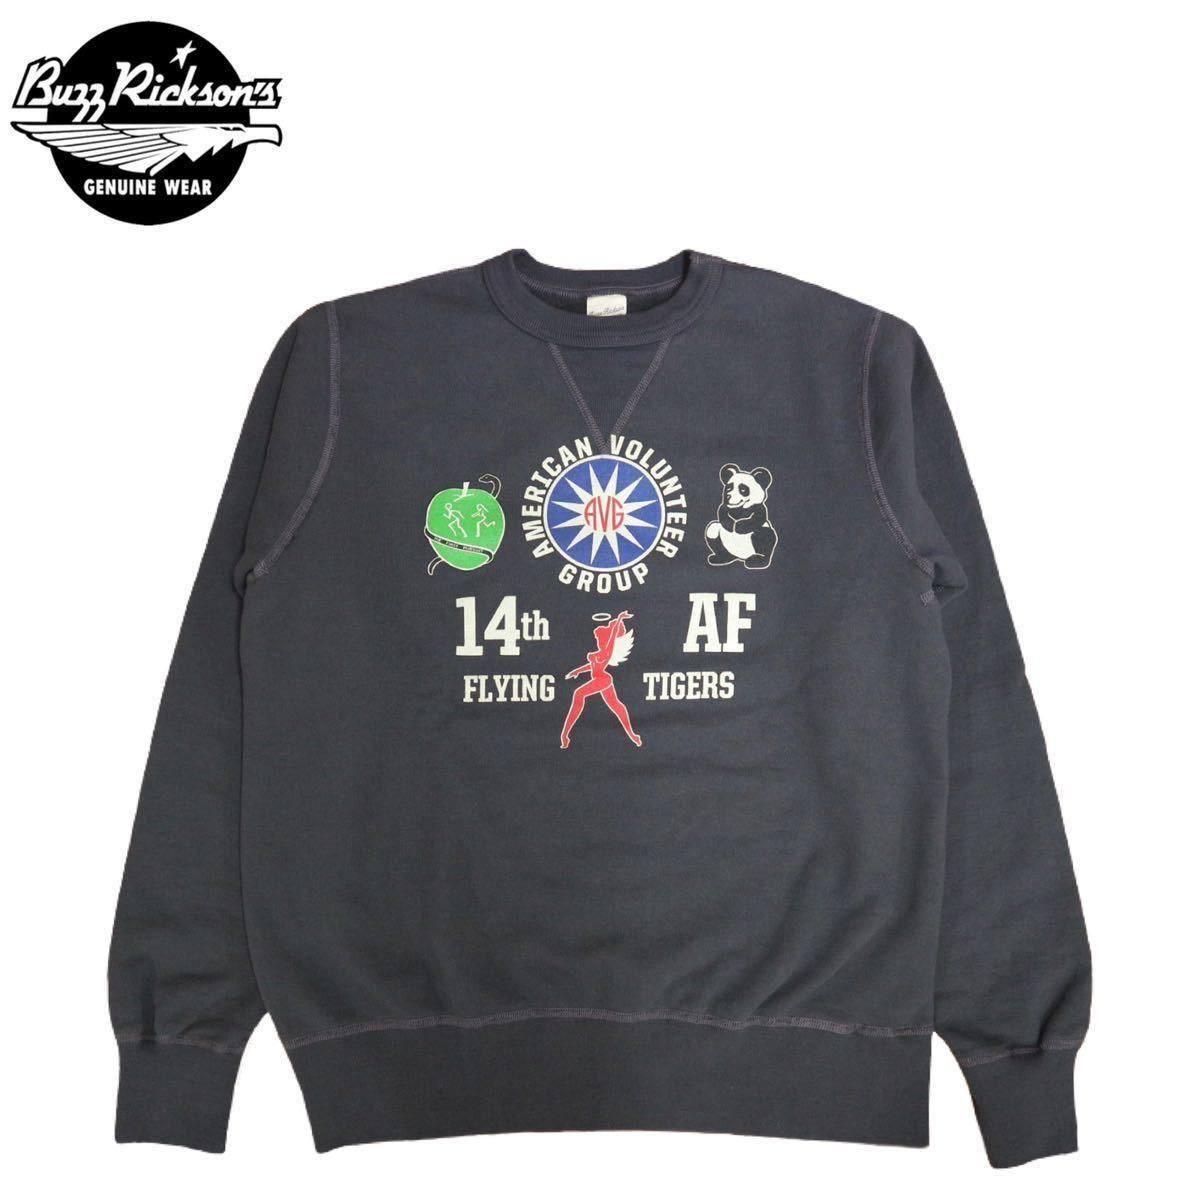 BUZZ RICKSON’S BR69066 119・BLACK/SIZE XL SET-IN CREW NECK SWEAT SHIRTS “14th AIR FORCE”スウェット